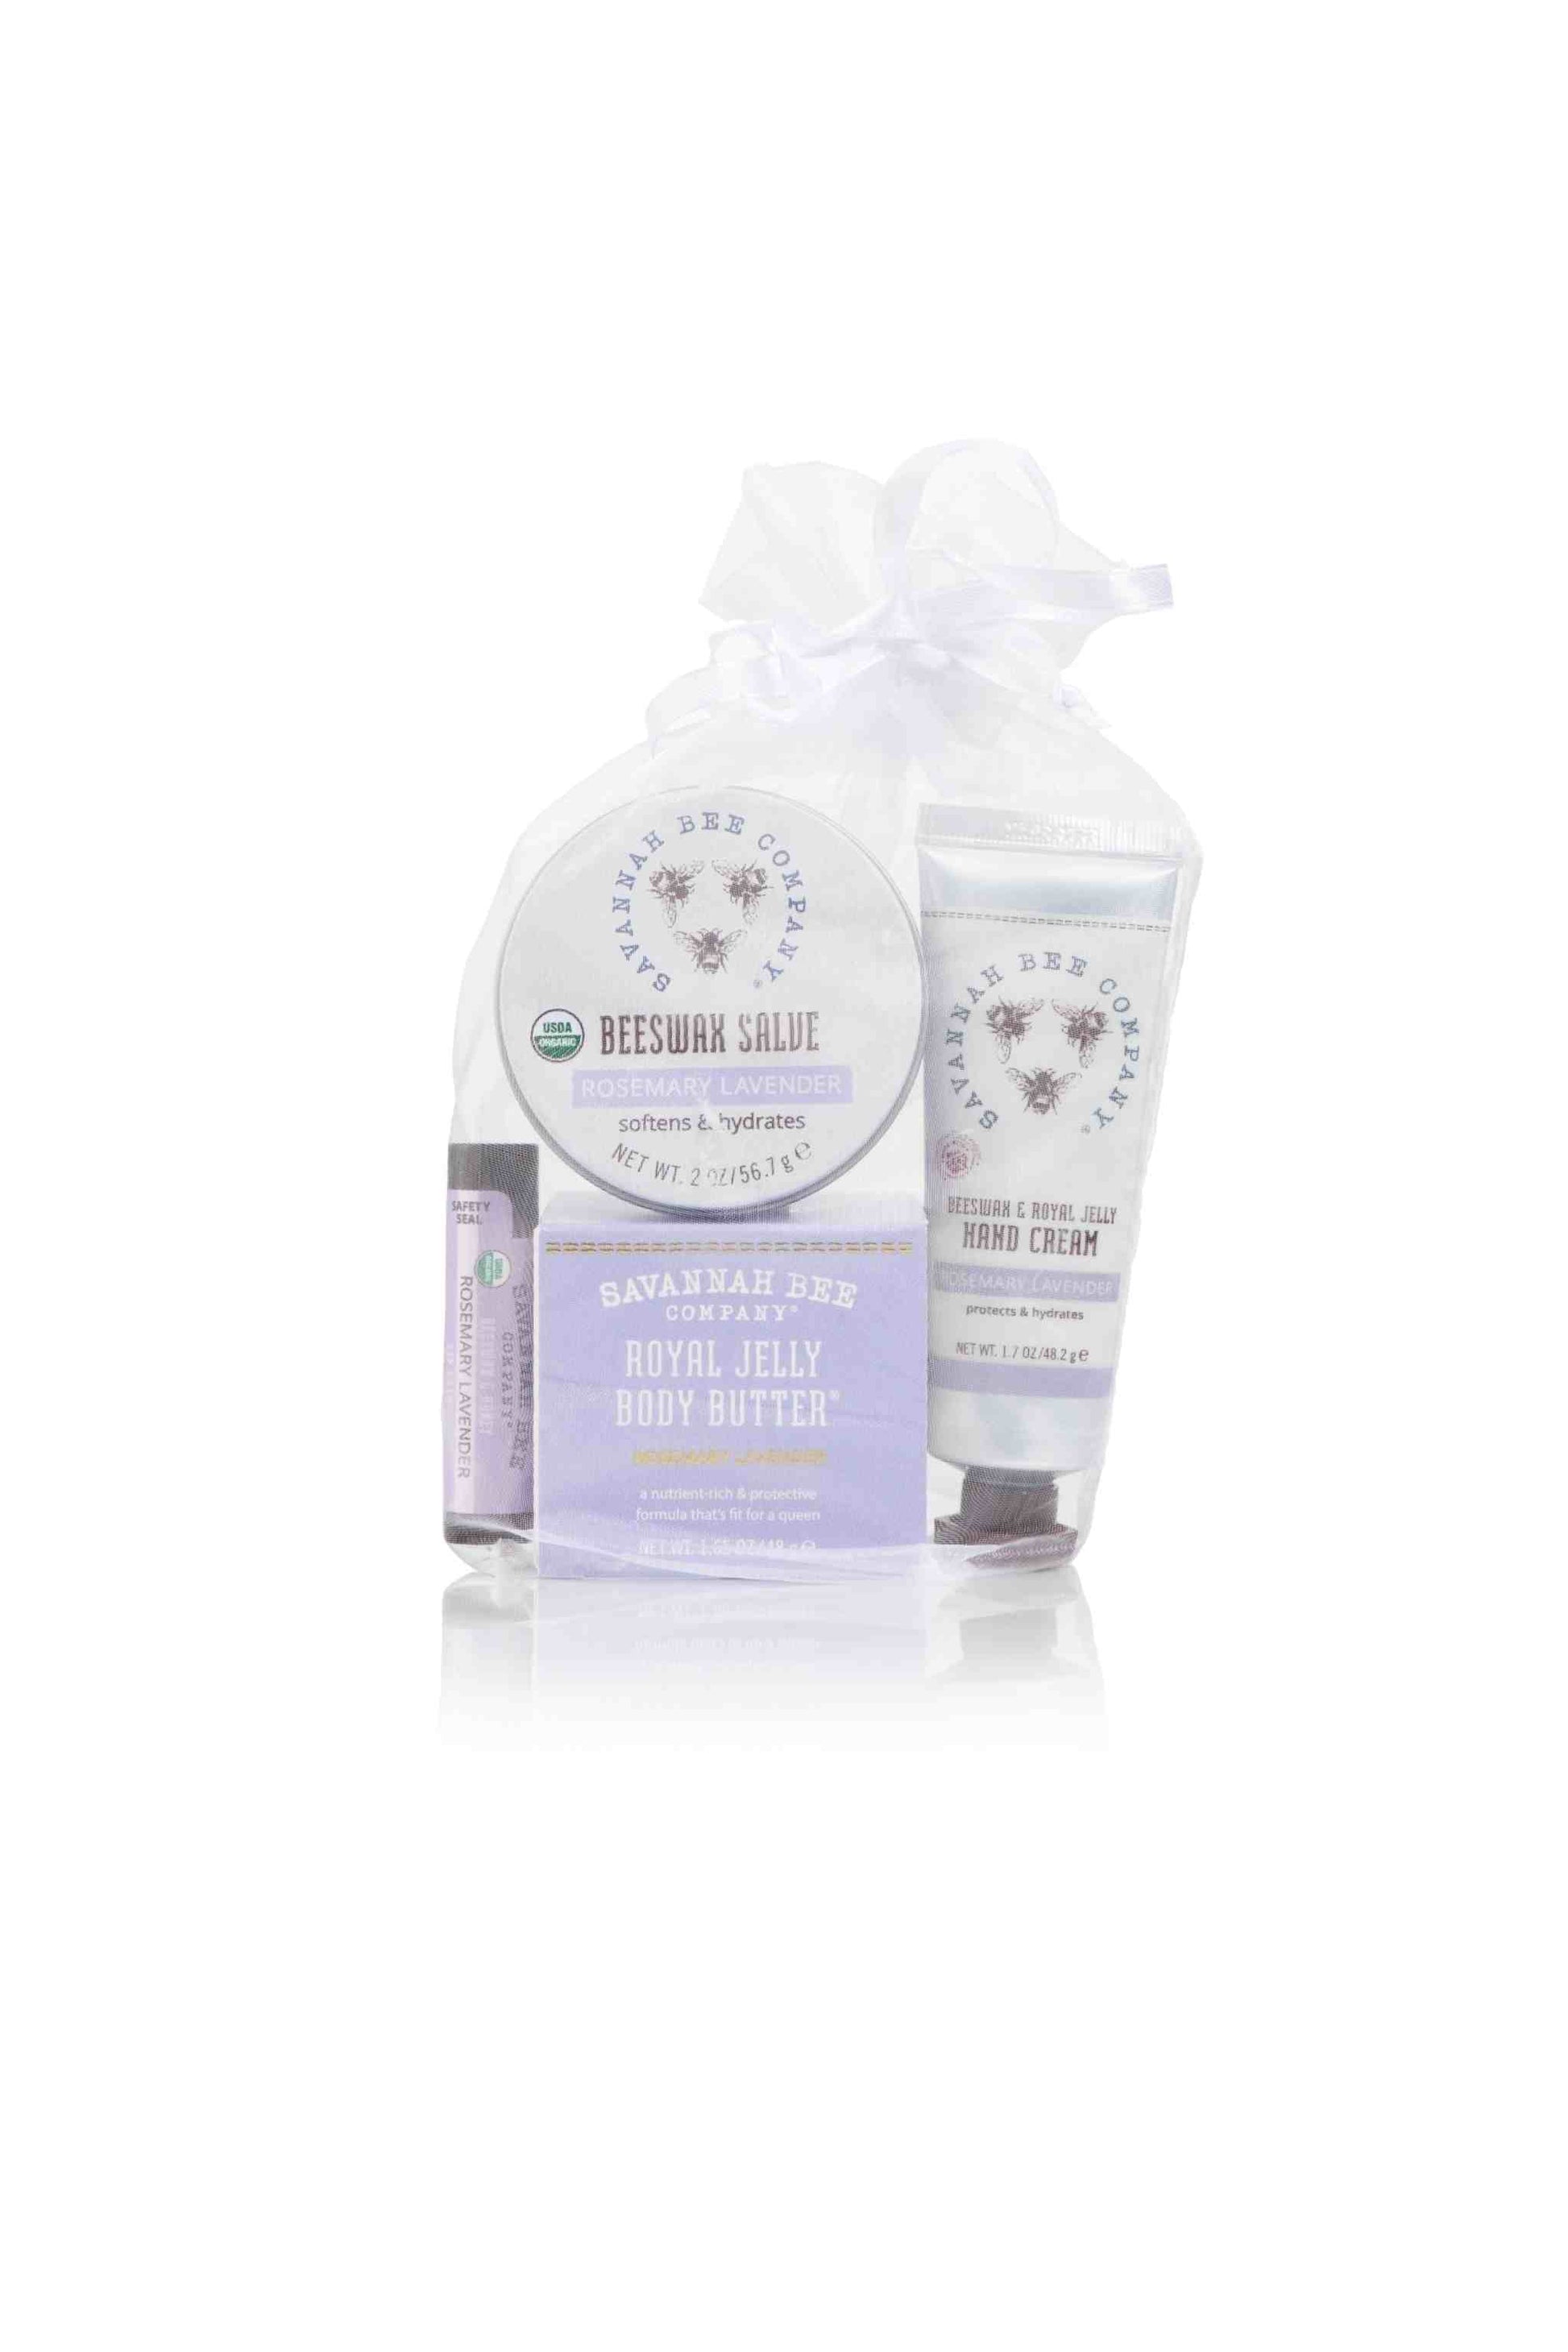 Lavender Love Gift Set contains Rosemary Lavender Beeswax Salve, Beeswax Royally Jelly Hand Cream, Royal Jelly Body Butter and Lip Balm in a organza bag